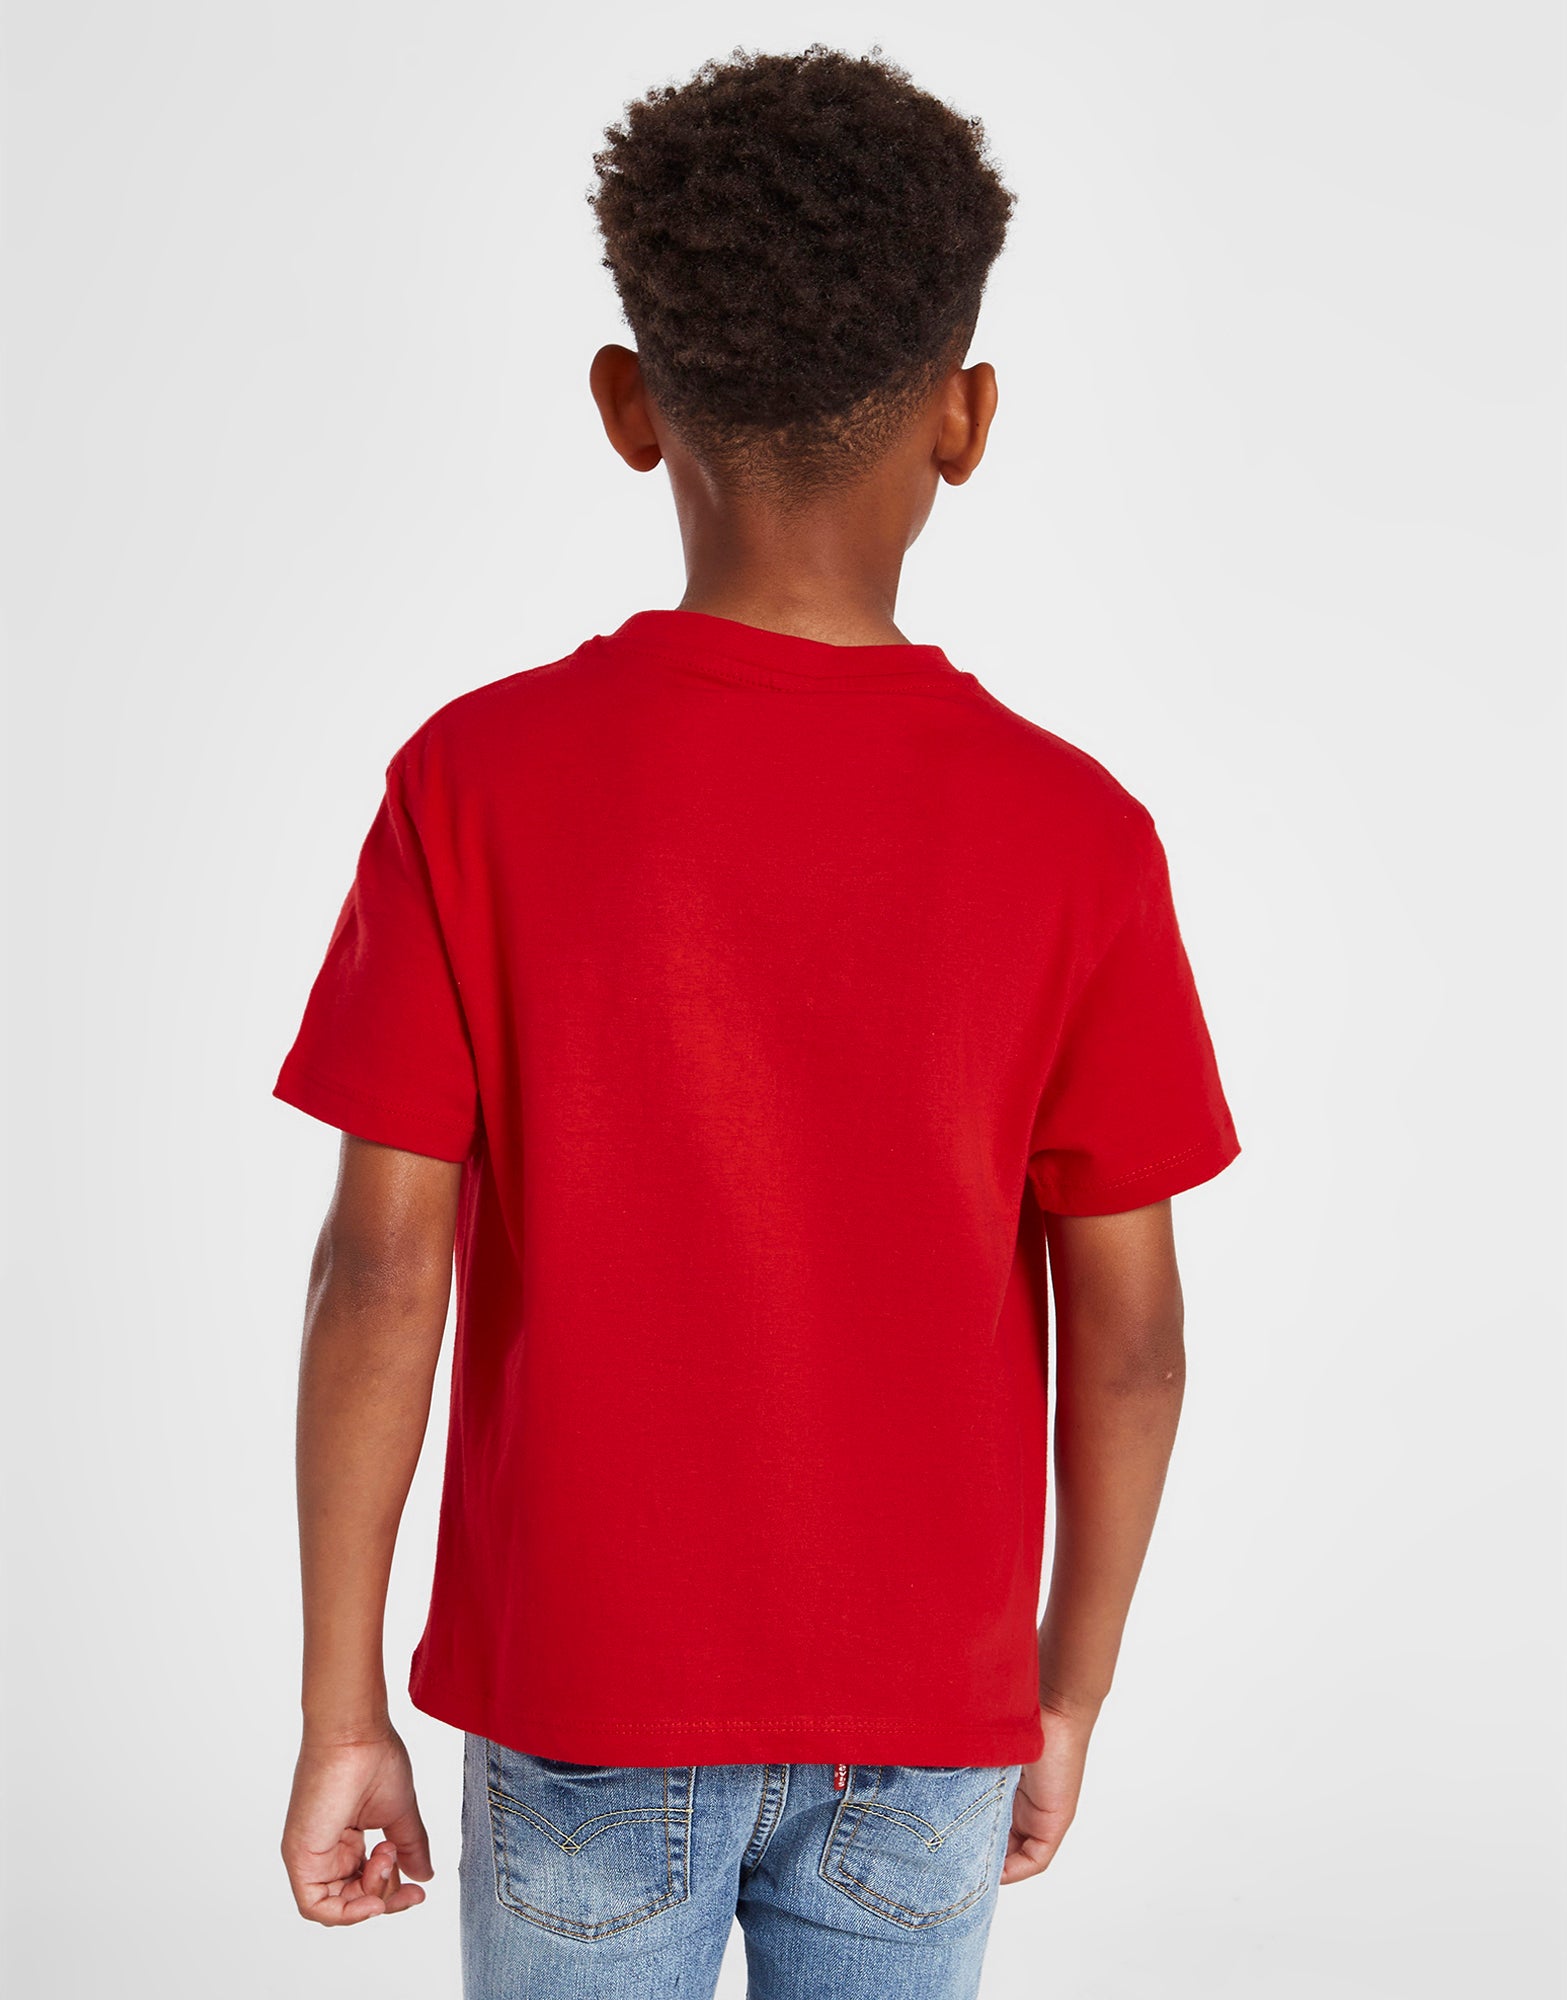 Official Team Wales Kids Crest T-shirt - Red - The World Football Store